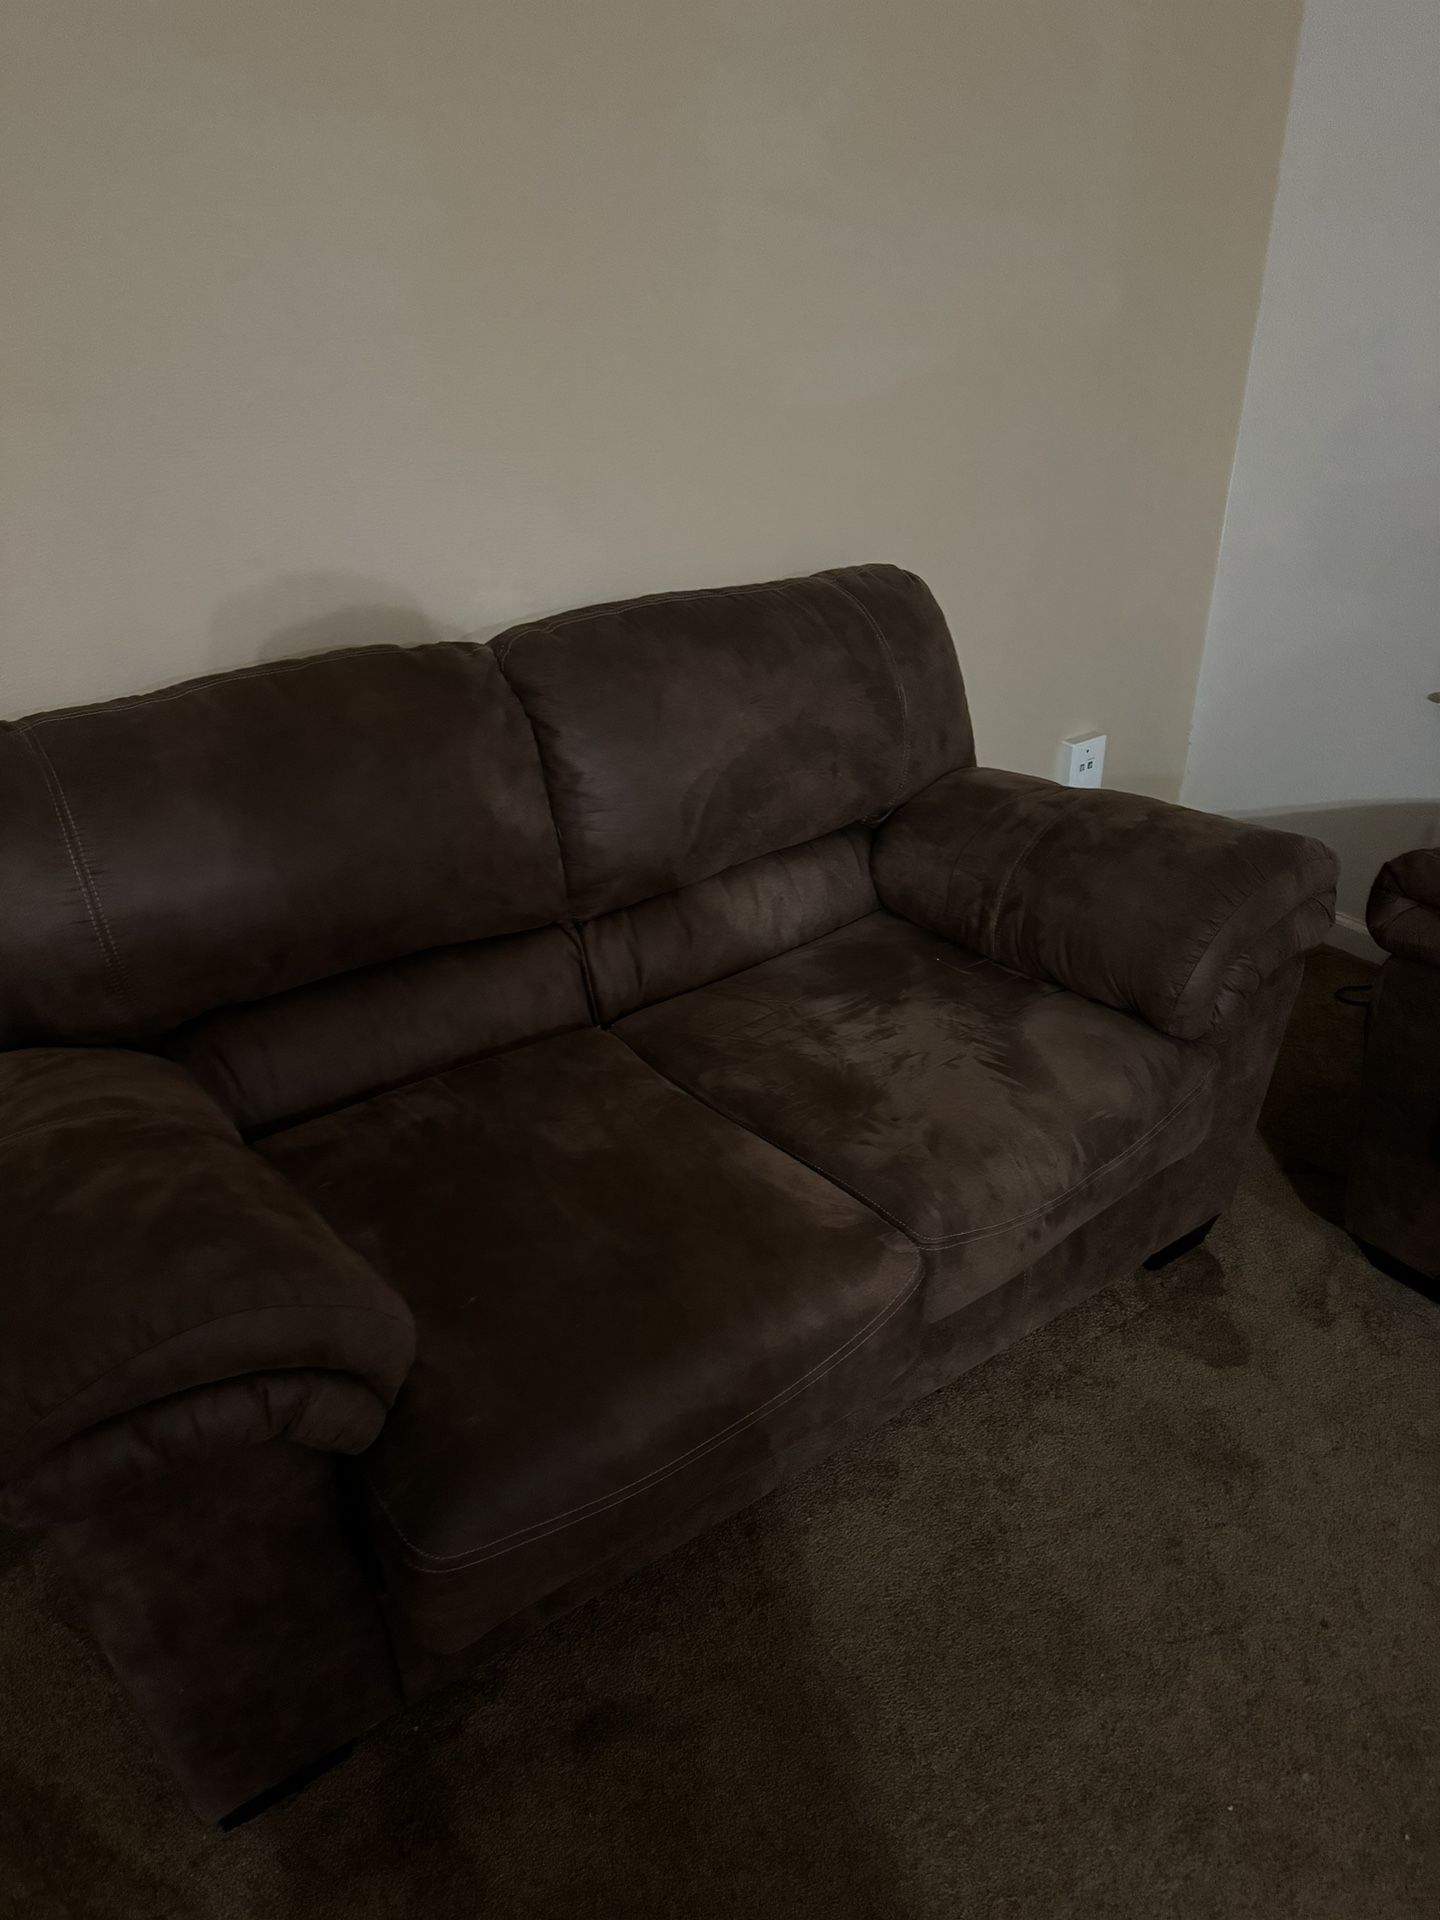 2 Couches Almost New From ASHLEY